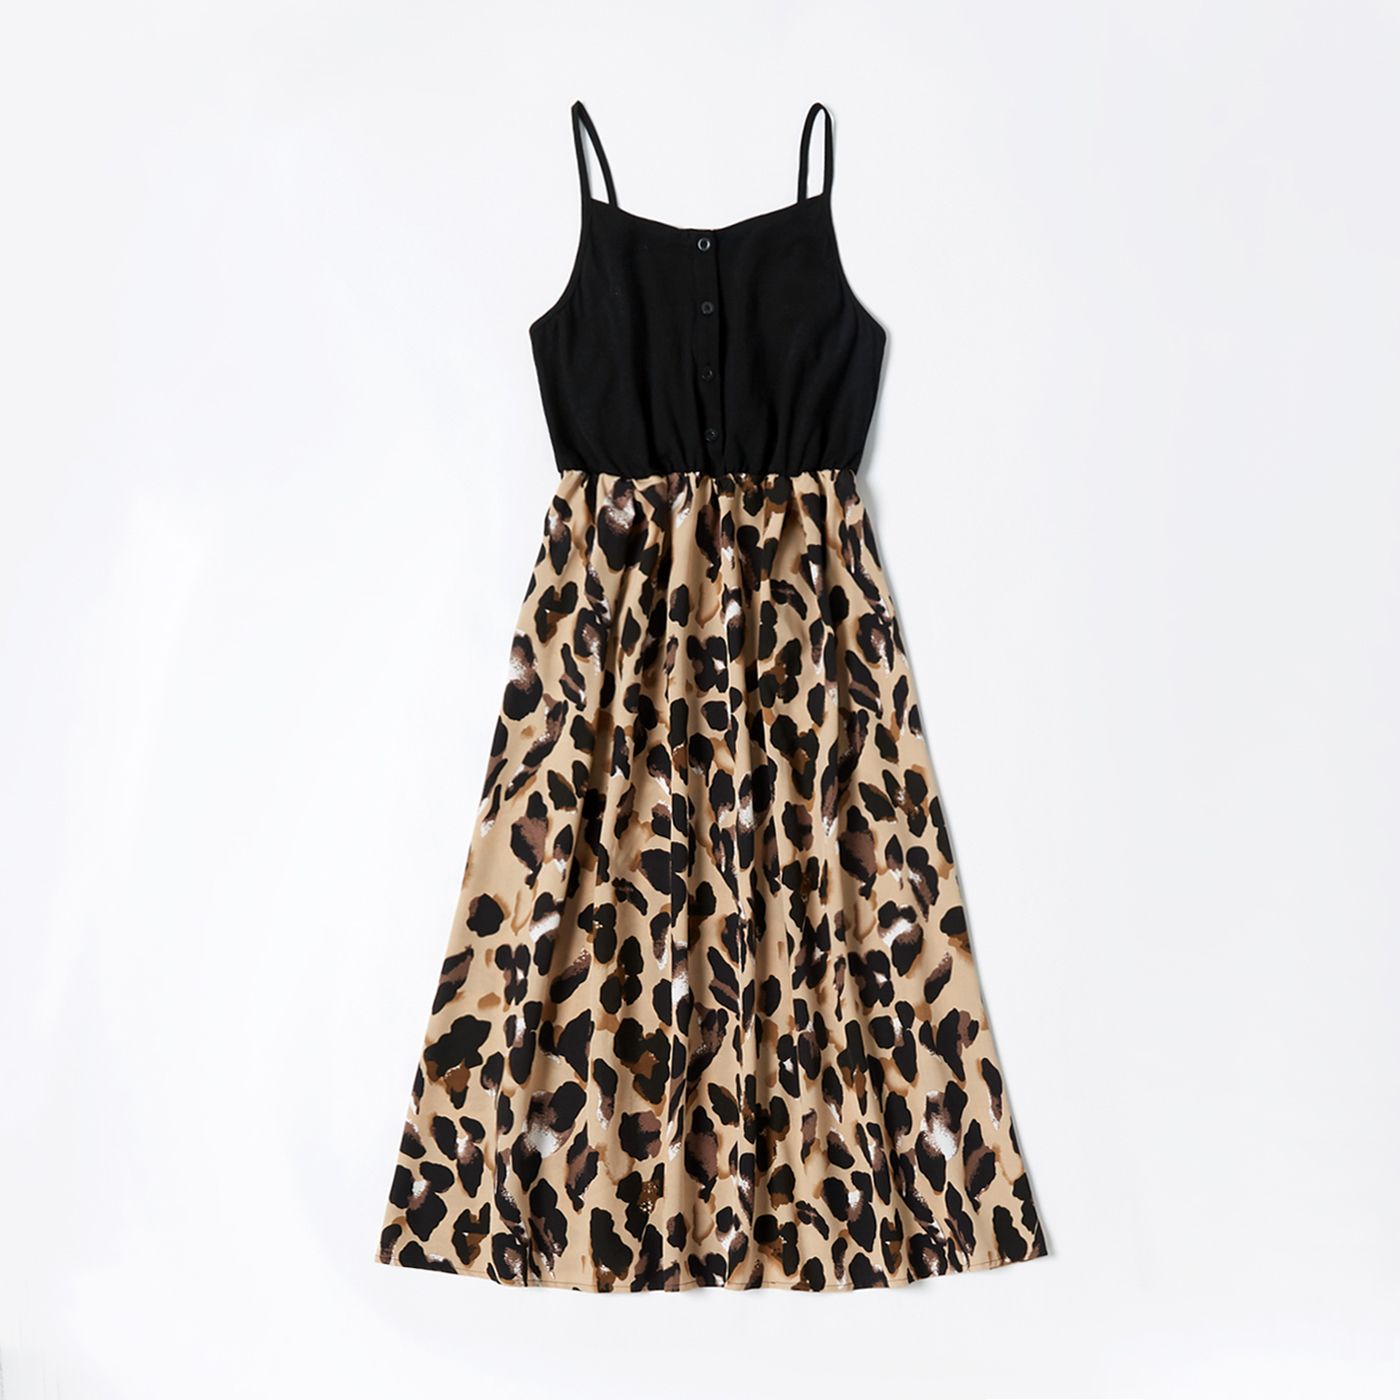 Leopard Print Splice Black Sling Dresses For Mommy And Me